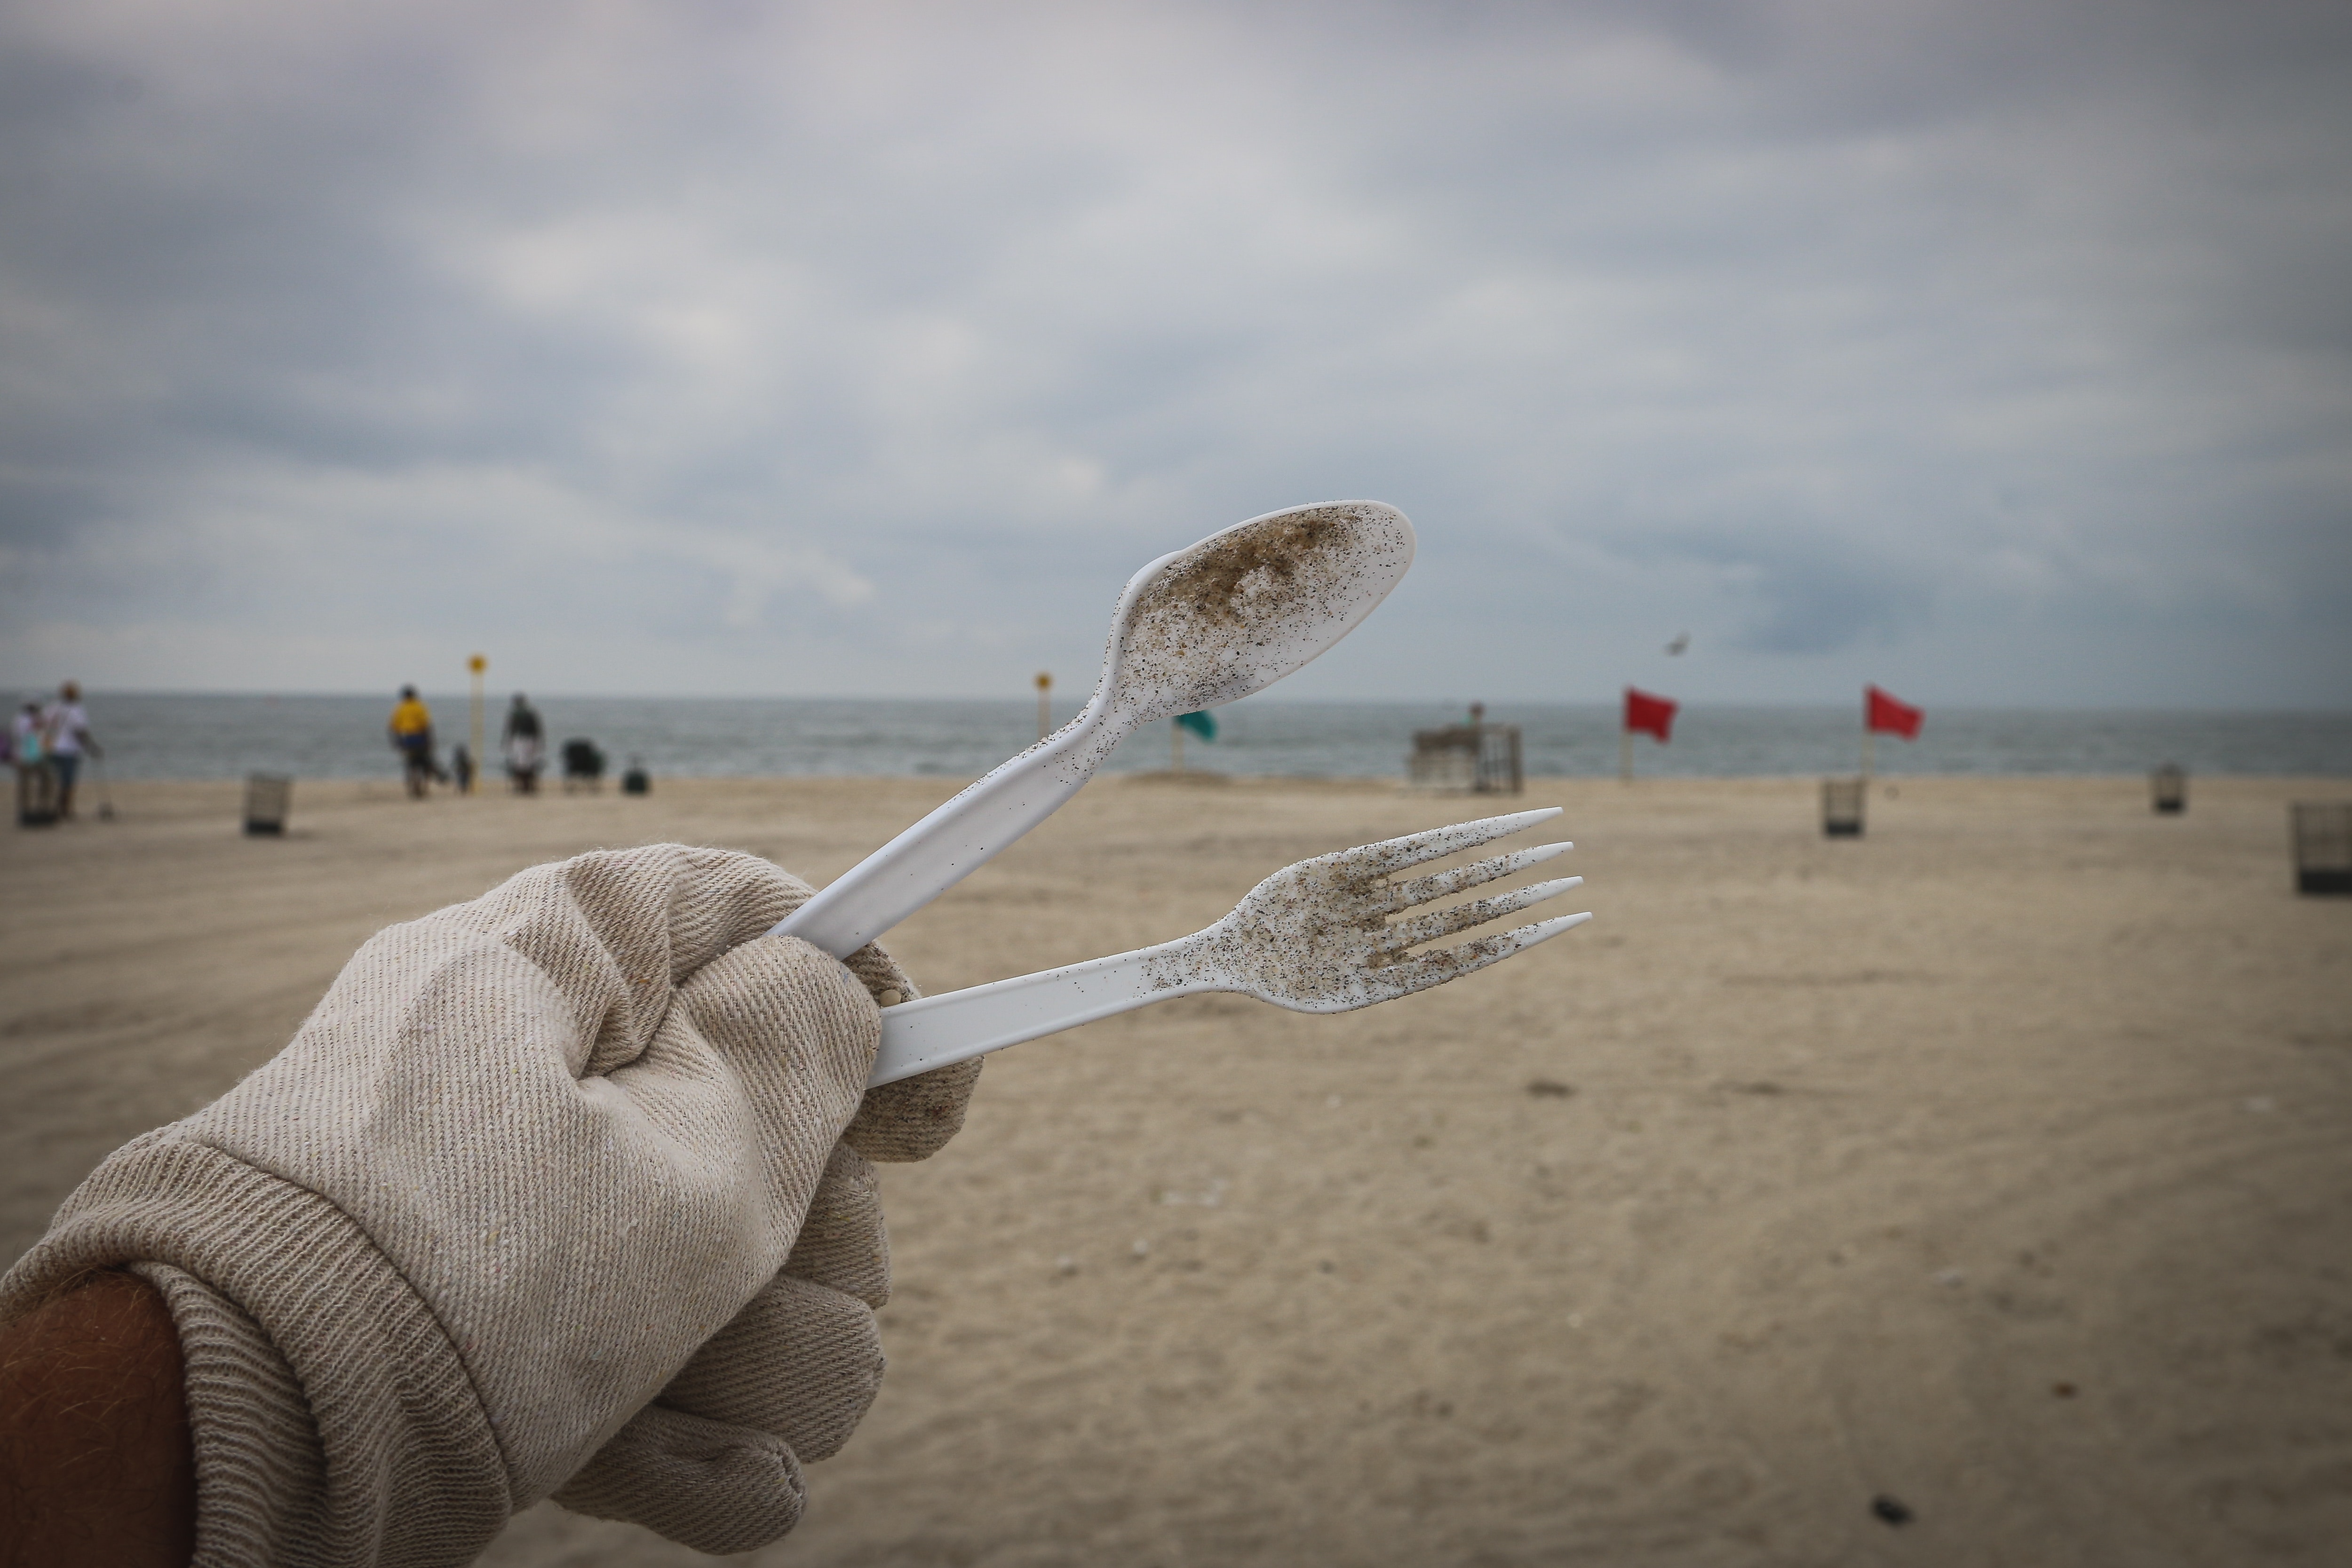 Found these single use plastic utensils during a recent beach cleanup in New York. During the Summer our beaches get crowded, garbages fill up quickly, and plastic debris flies away with the wind. Bring less plastic with you to the beach in the first place, and help prevent this from happening. Follow on Instagram @wildlife_by_yuri, and find more free plastic pollution photos at: https://www.wildlifebyyuri.com/free-ocean-photography